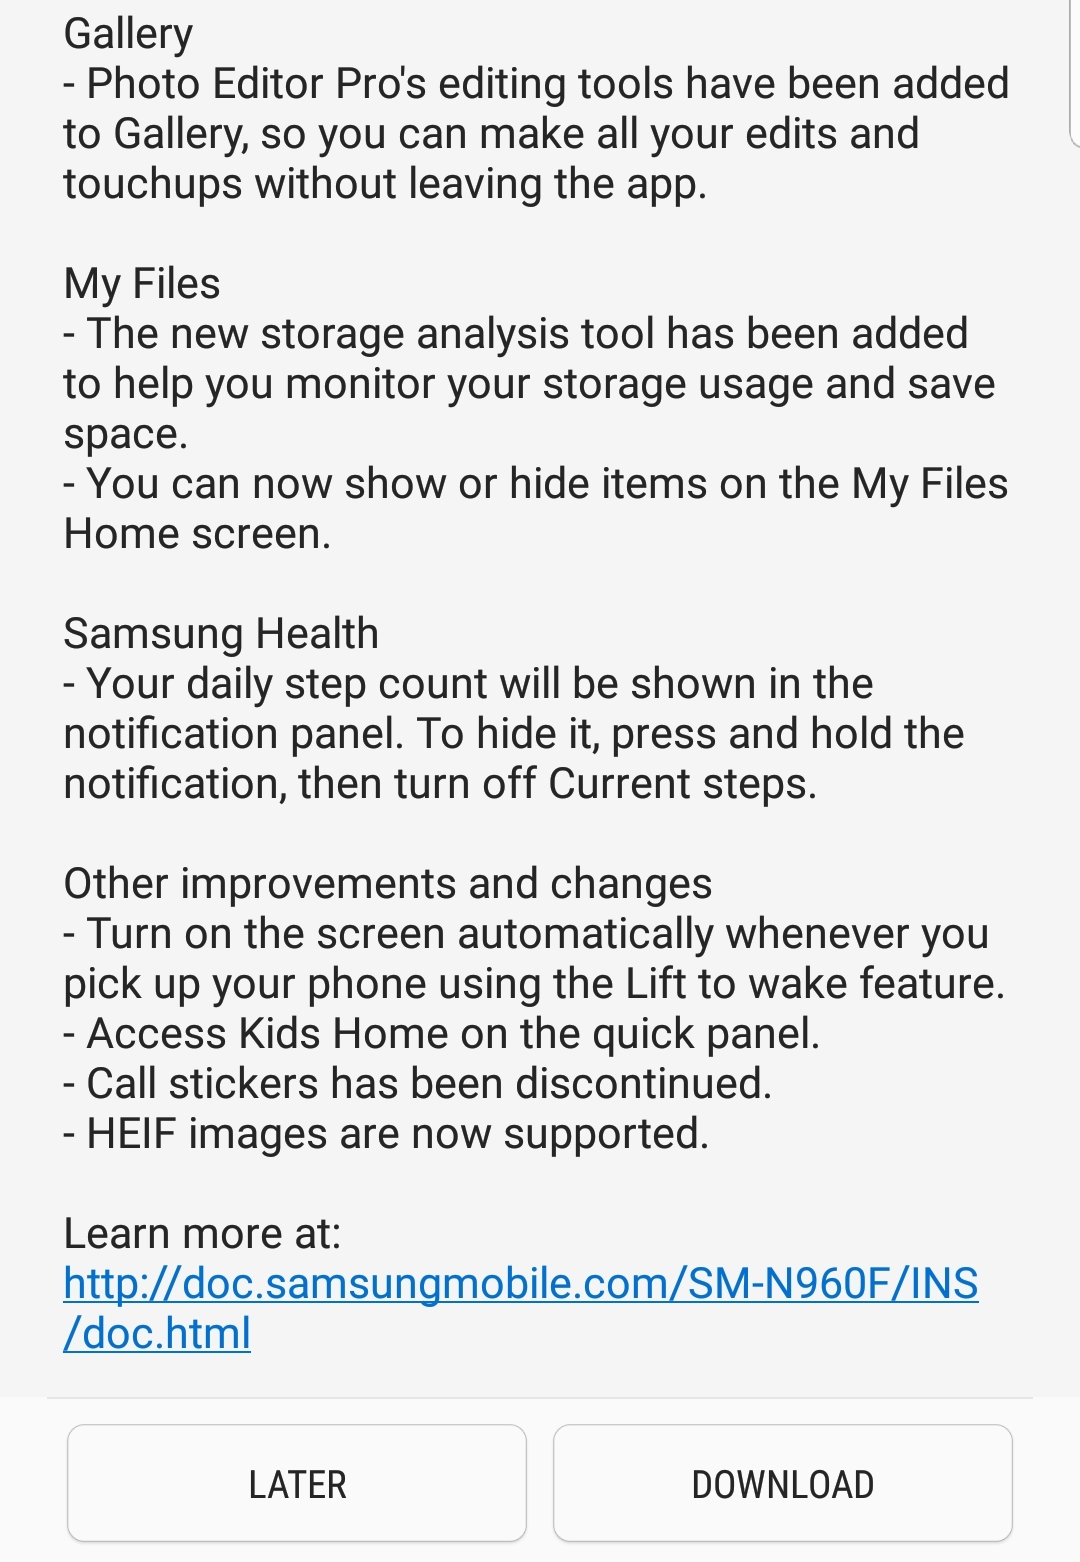 Samsung One UI Stable Version Rolled Out, Key Features and Installation Guide